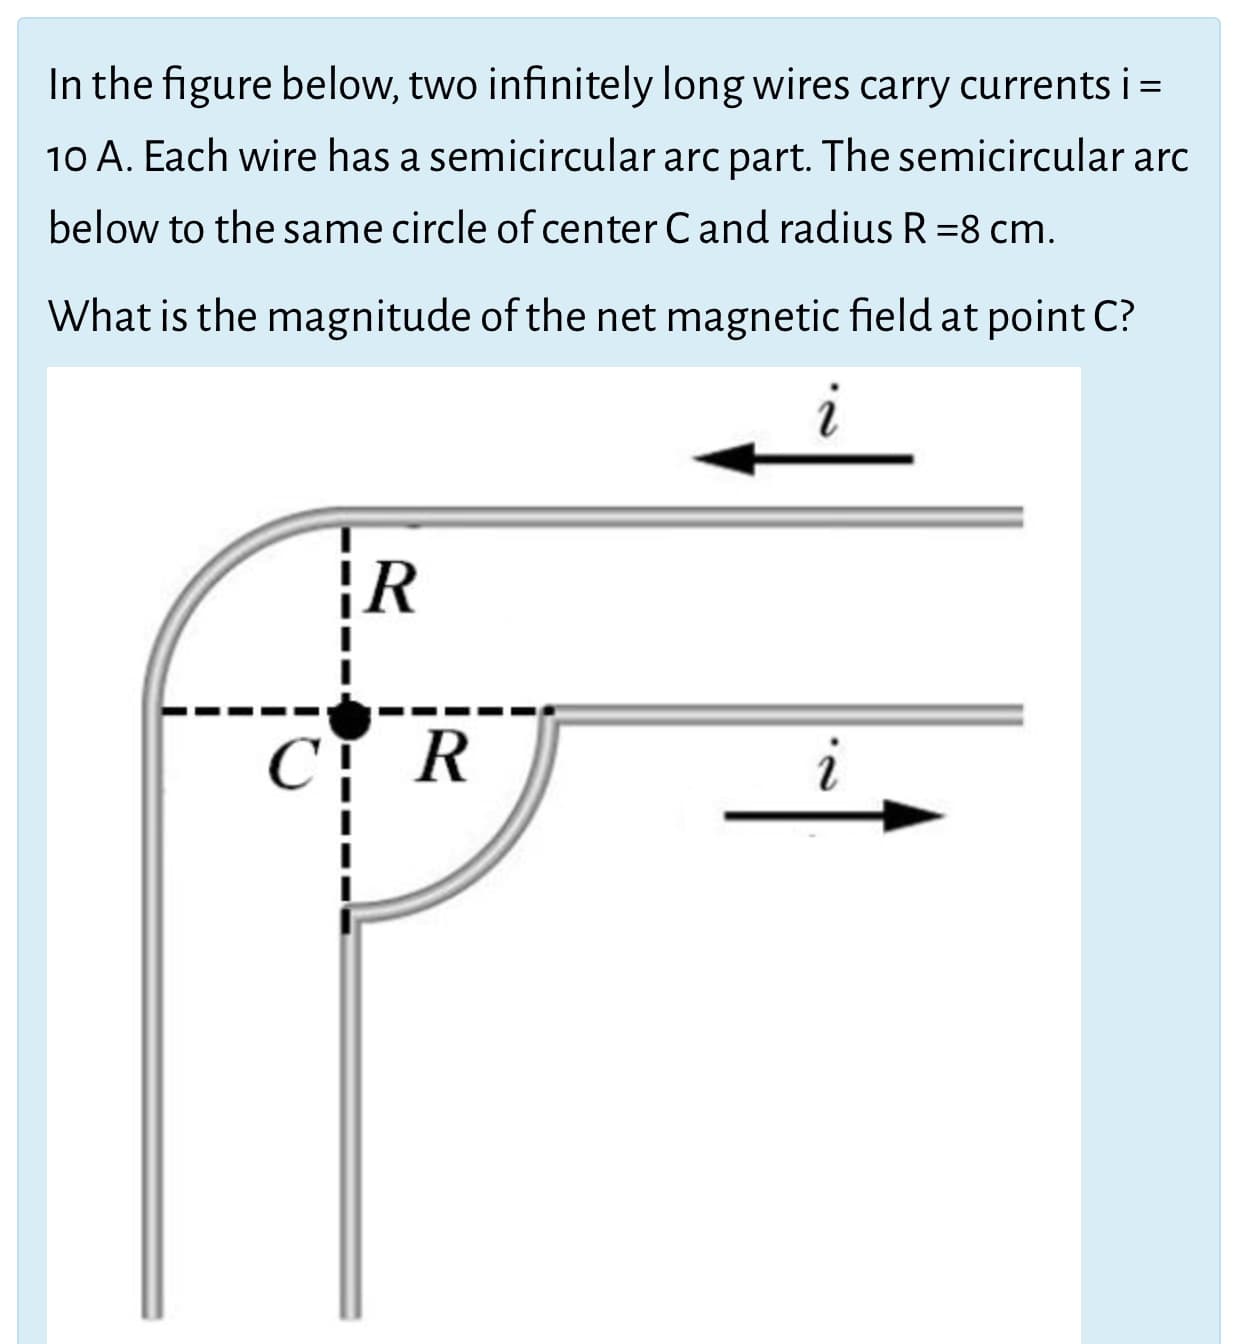 In the figure below, two infinitely long wires carry currents i =
10 A. Each wire has a semicircular arc part. The semicircular arc
below to the same circle of center Cand radius R =8 cm.
What is the magnitude of the net magnetic field at point C?
